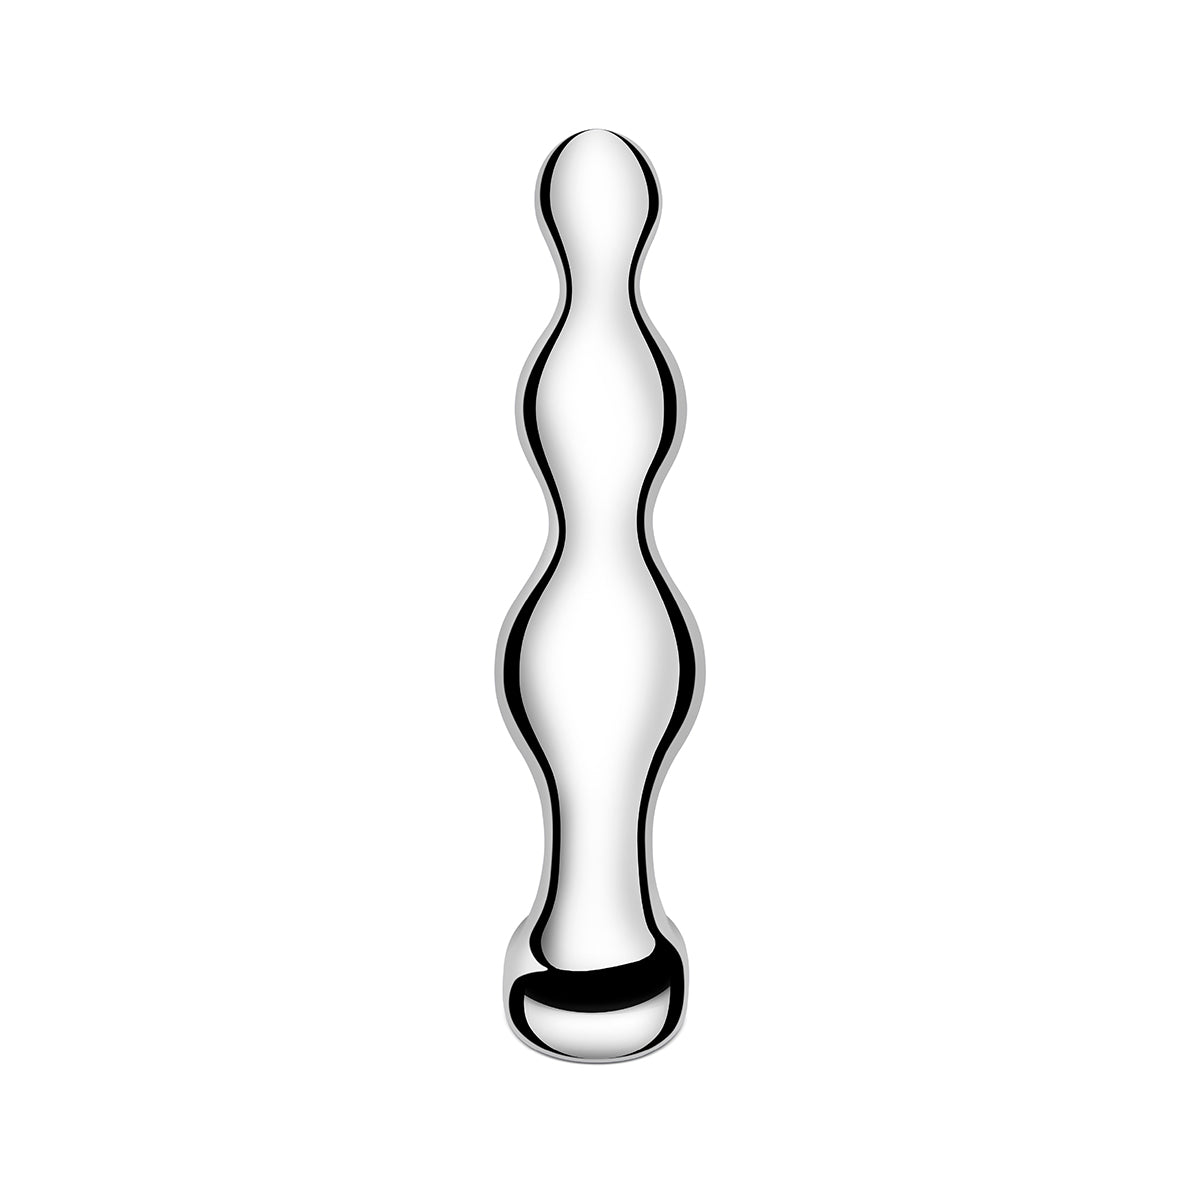 B-Vibe Stainless Steel Anal Beads